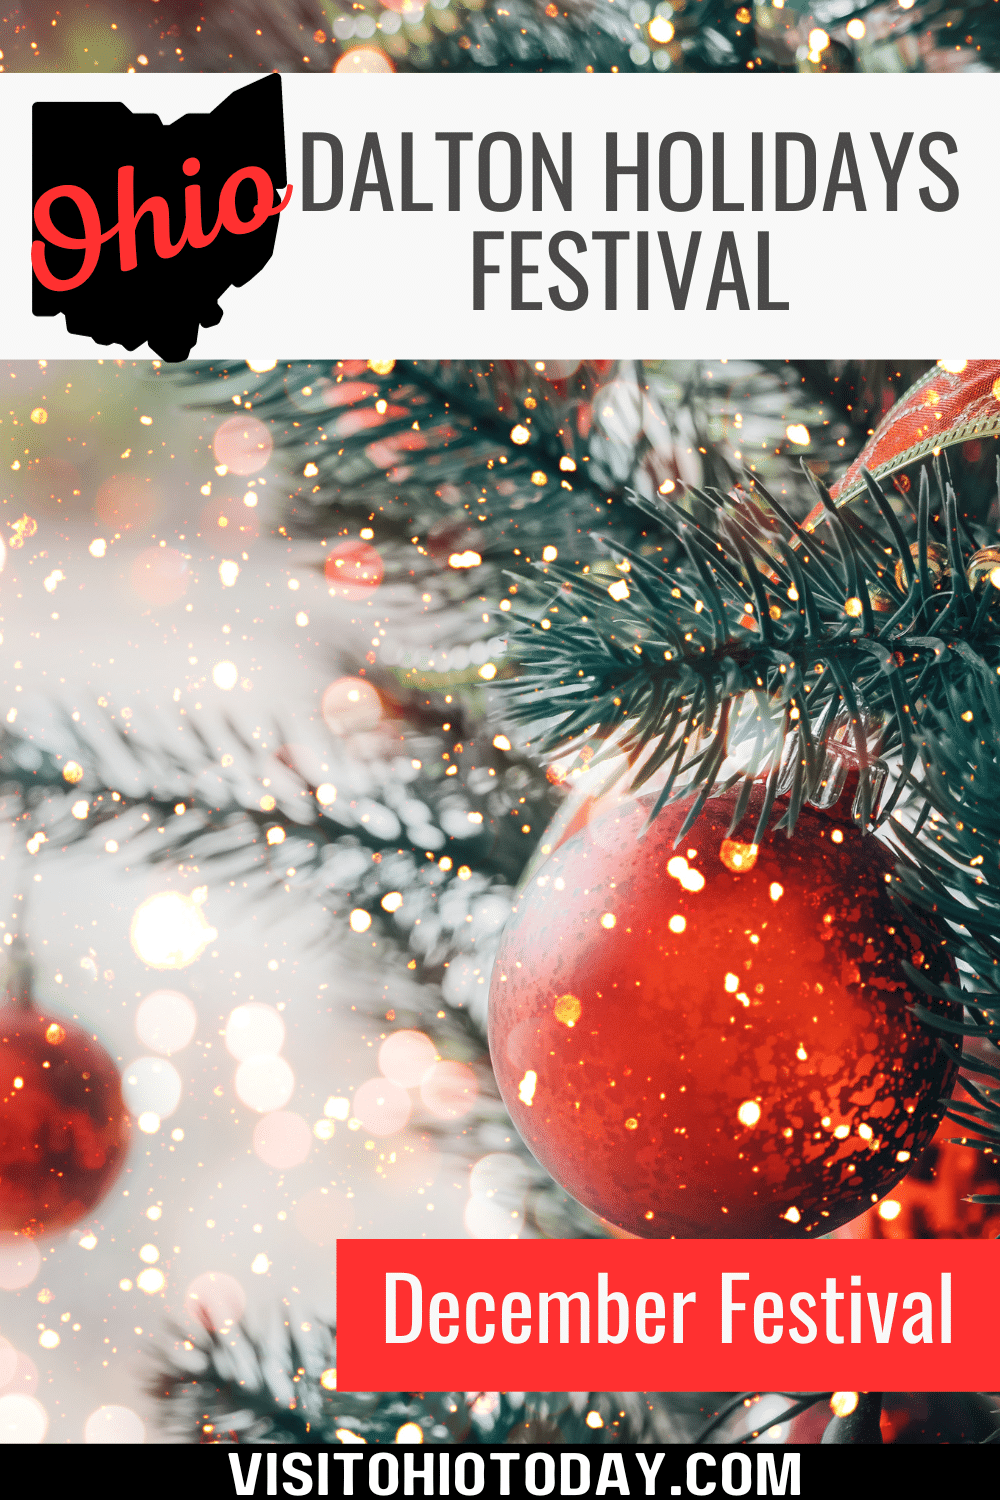 The Dalton Holidays Festival is an annual event that takes place in downtown Dalton and at Dalton High School in early December.